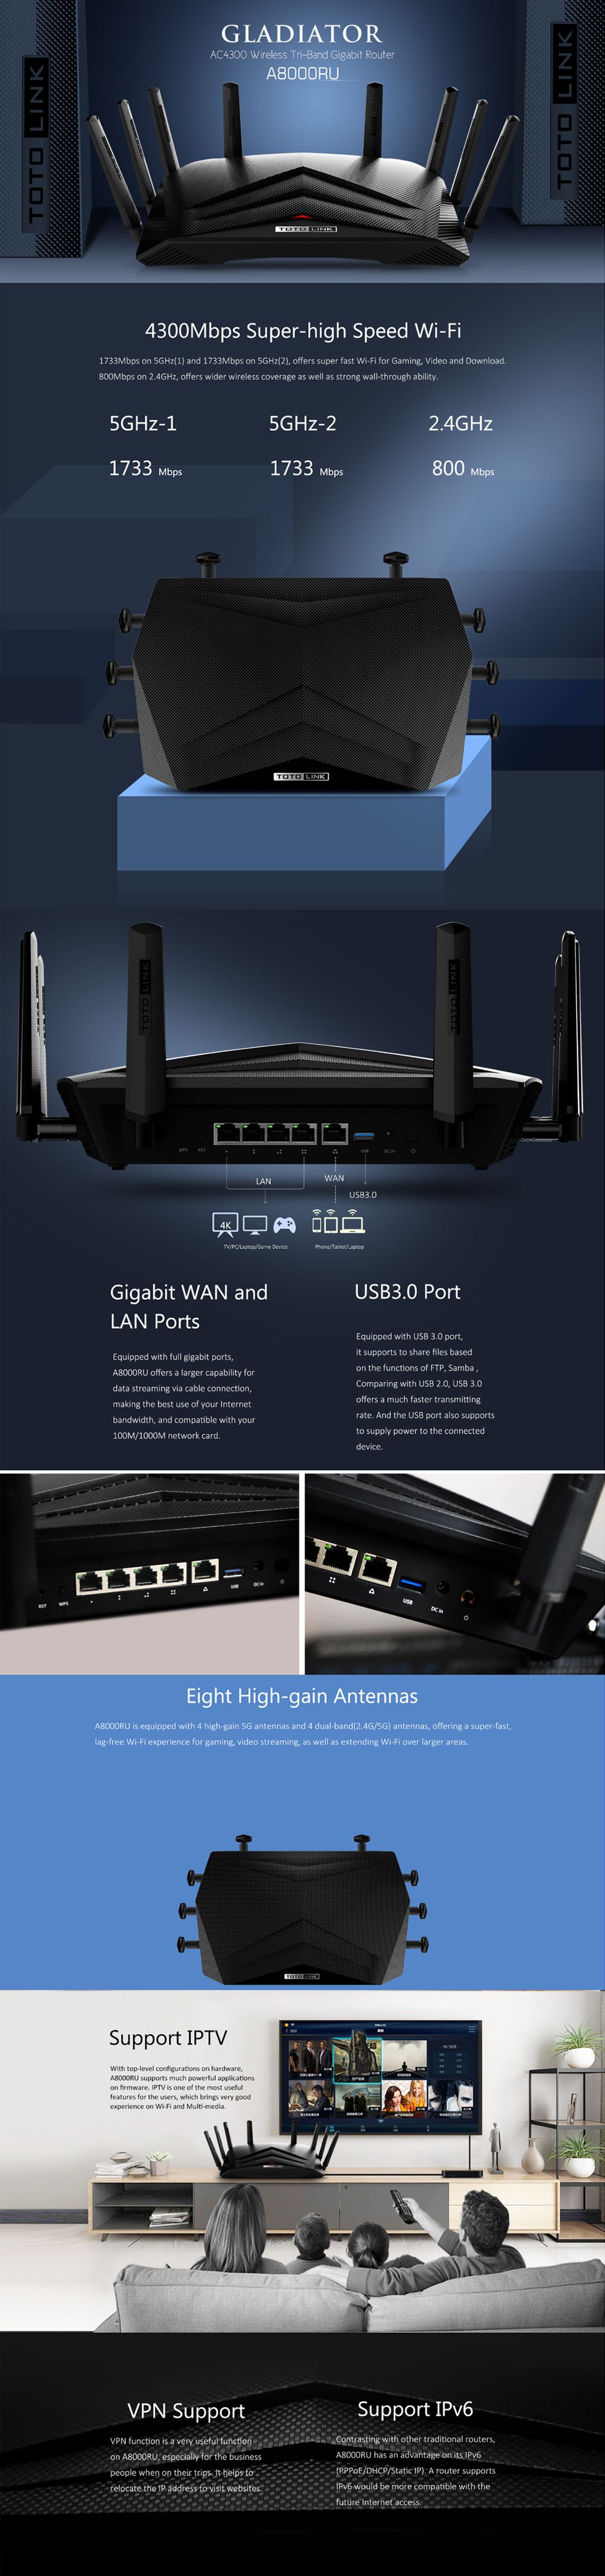 TOTOLINK-GLADIATOR-AC4300-Wireless-Tri-Band-Gigabit-Router-A8000RU-with-USB30-Port-Support-IPTV-VPN--1715811